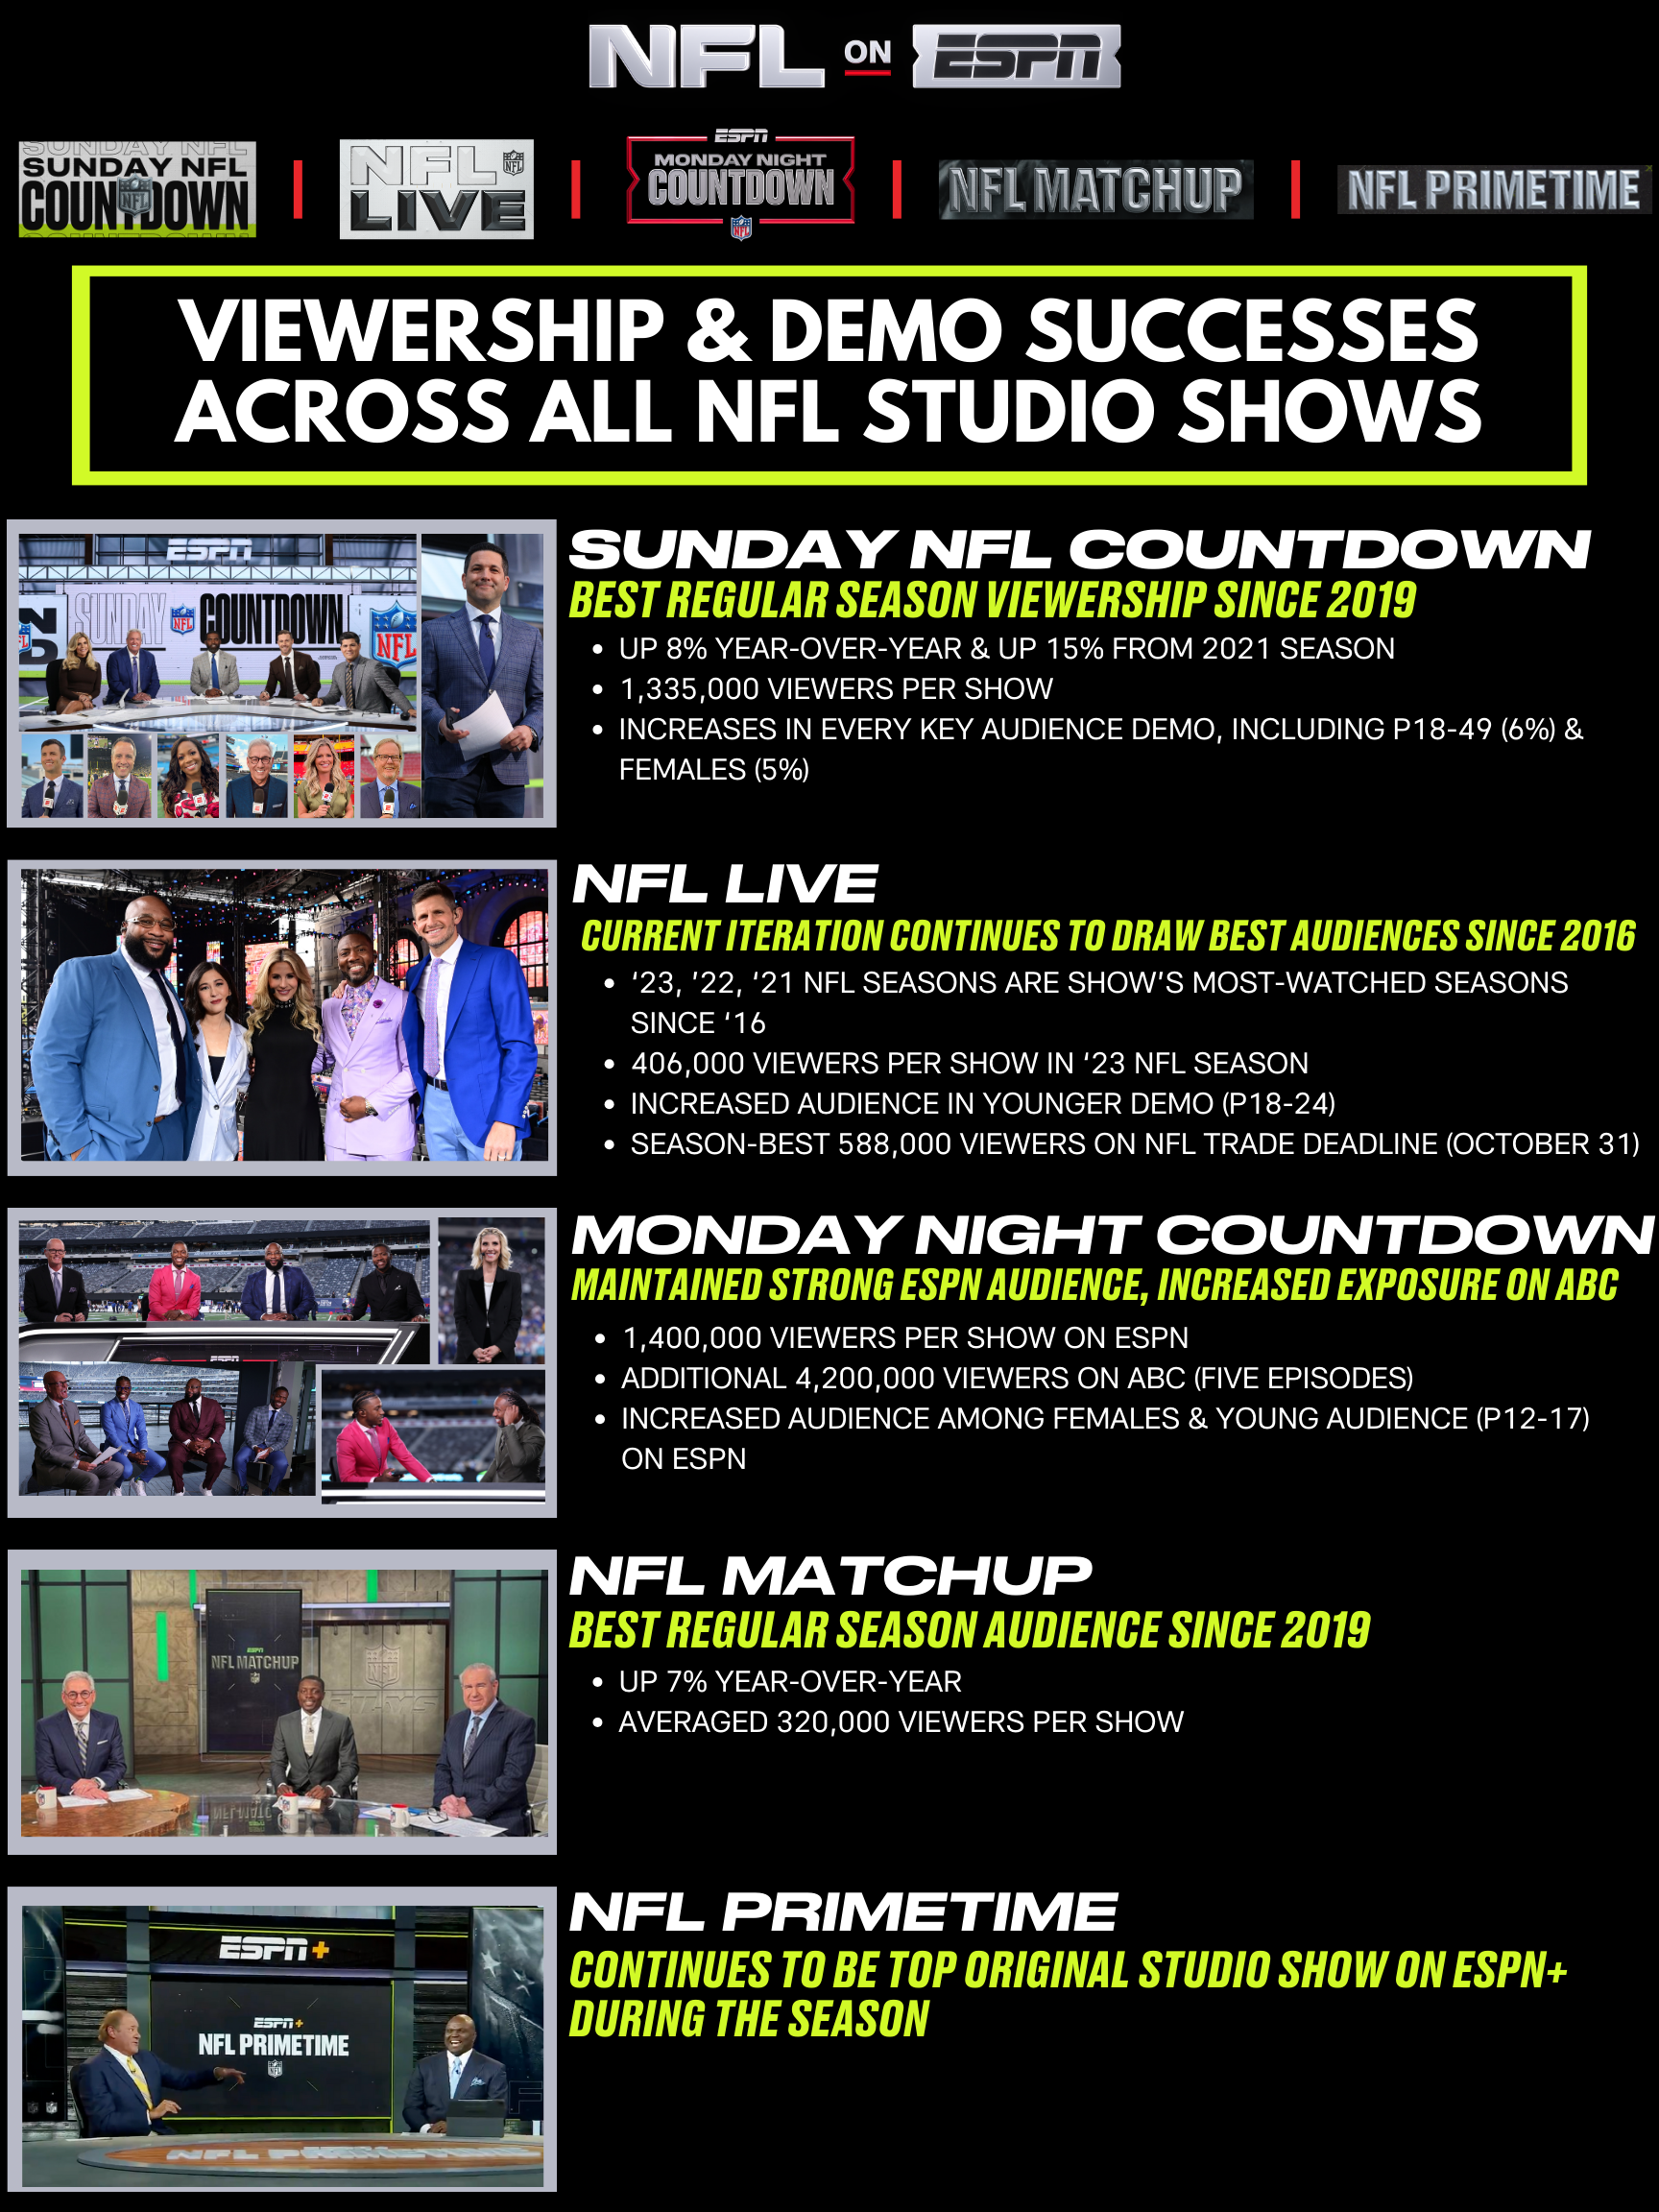 ESPN's "Sunday NFL Countdown" Achieves Its Most-Watched Regular Season Since 2019